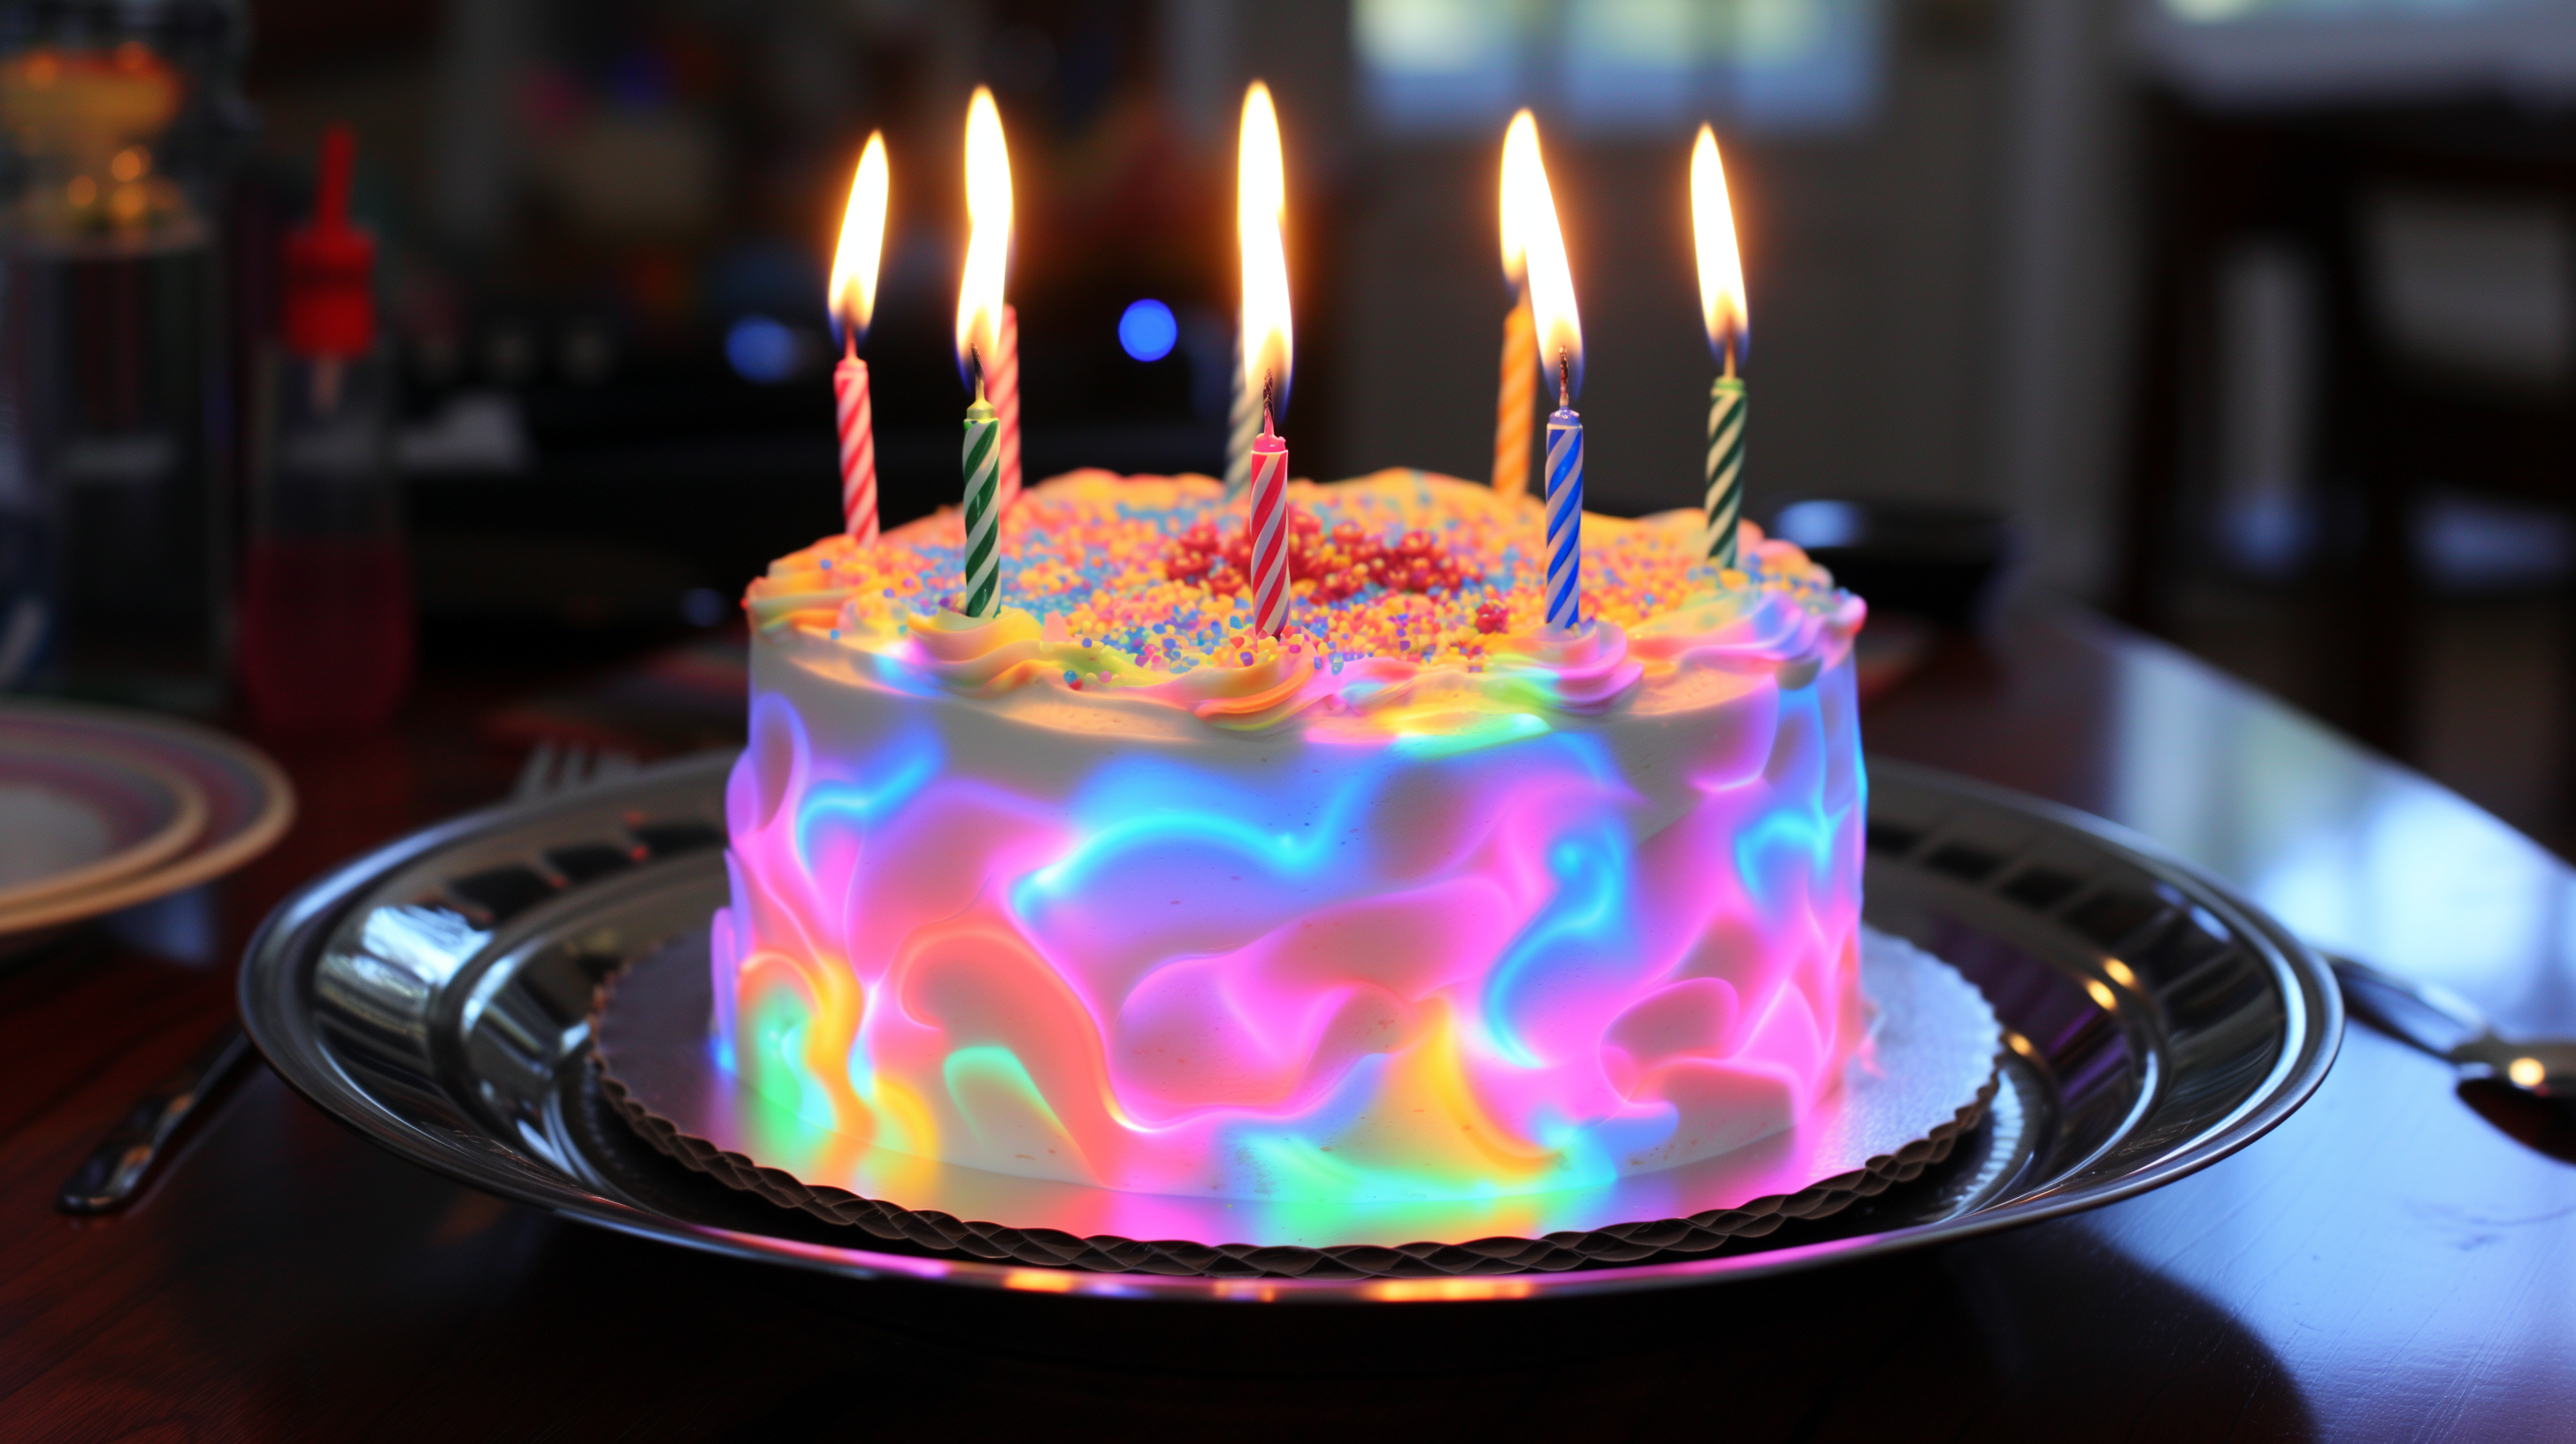 Colorful birthday cake with lit candles on a plate, perfect as a vibrant HD desktop wallpaper or background.